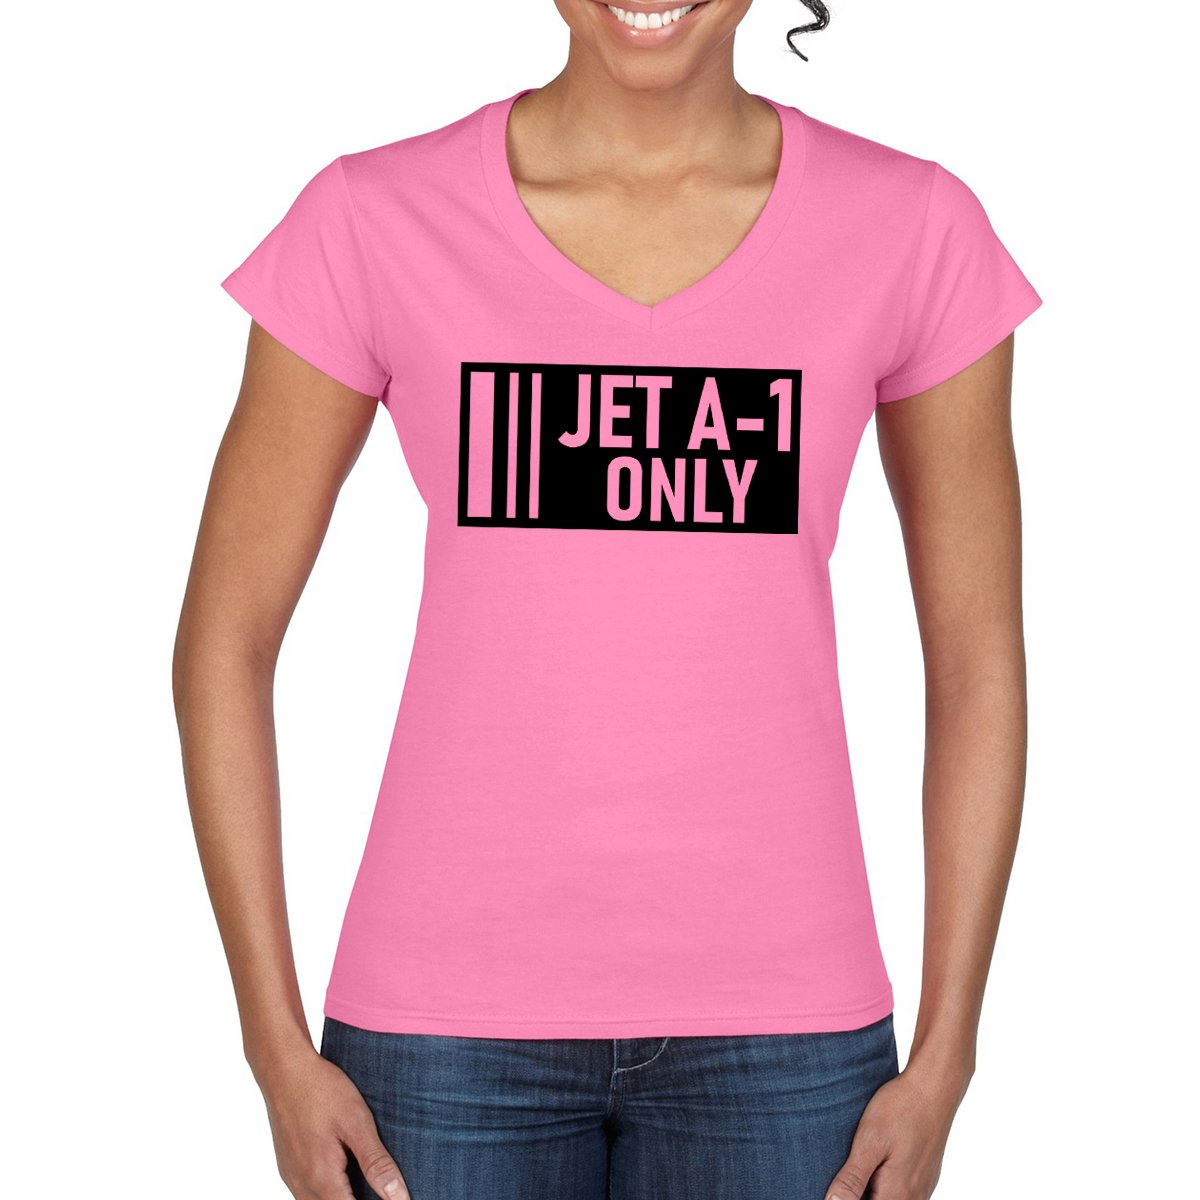 JET A-1 ONLY Women's Semi-Fitted T-Shirt